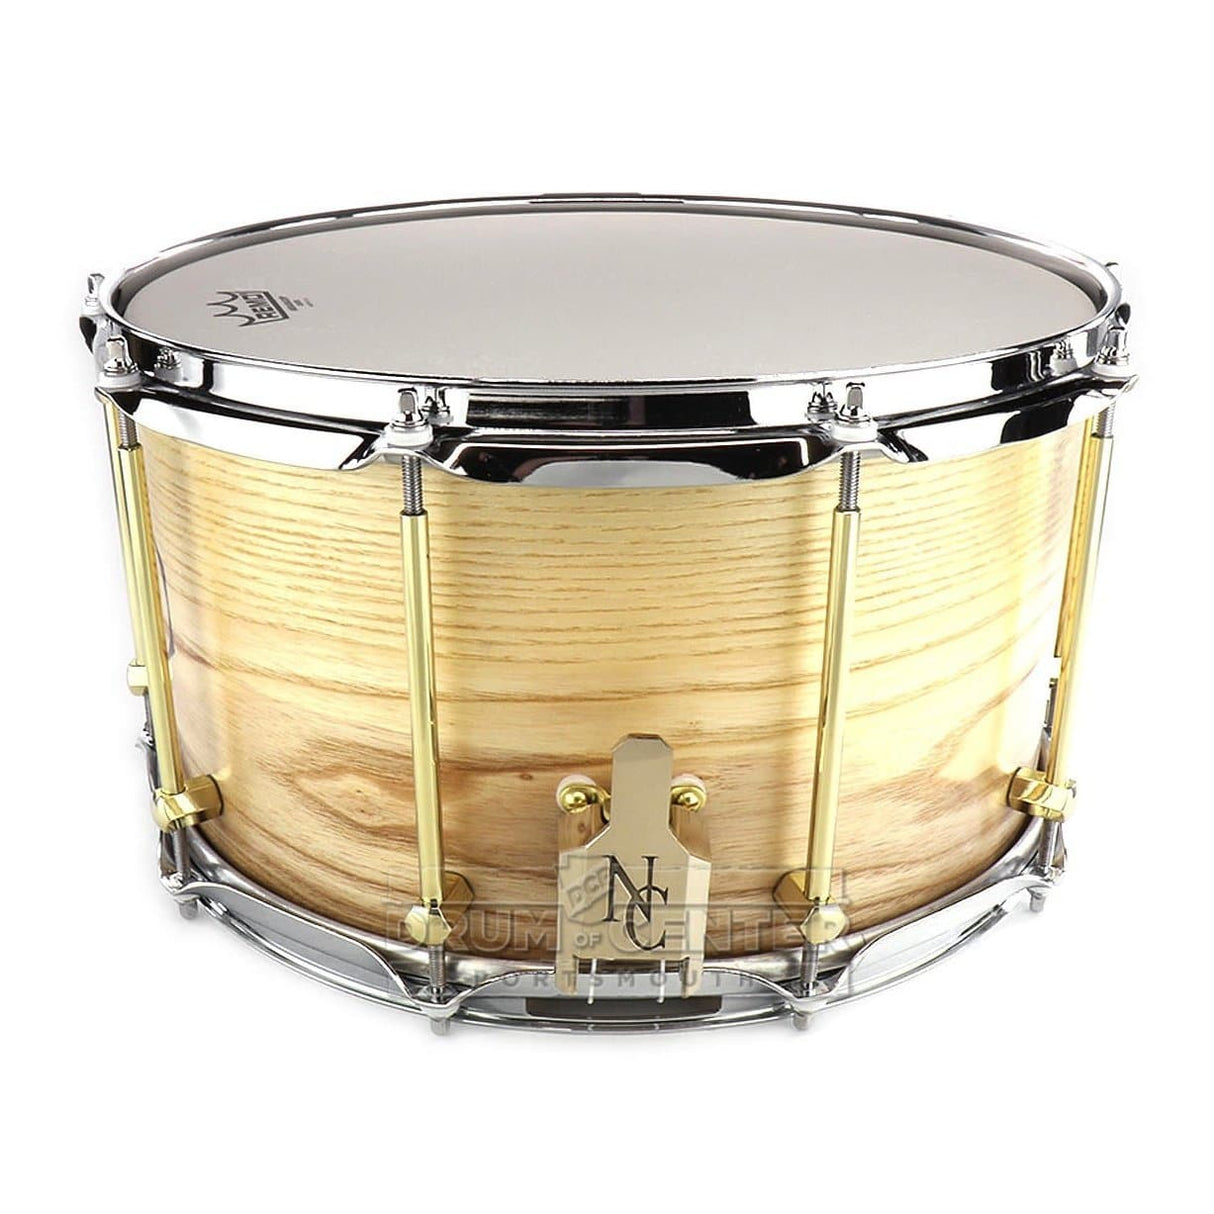 Noble & Cooley Solid Shell Classic Ash Snare Drum 14x8 Natural Oil